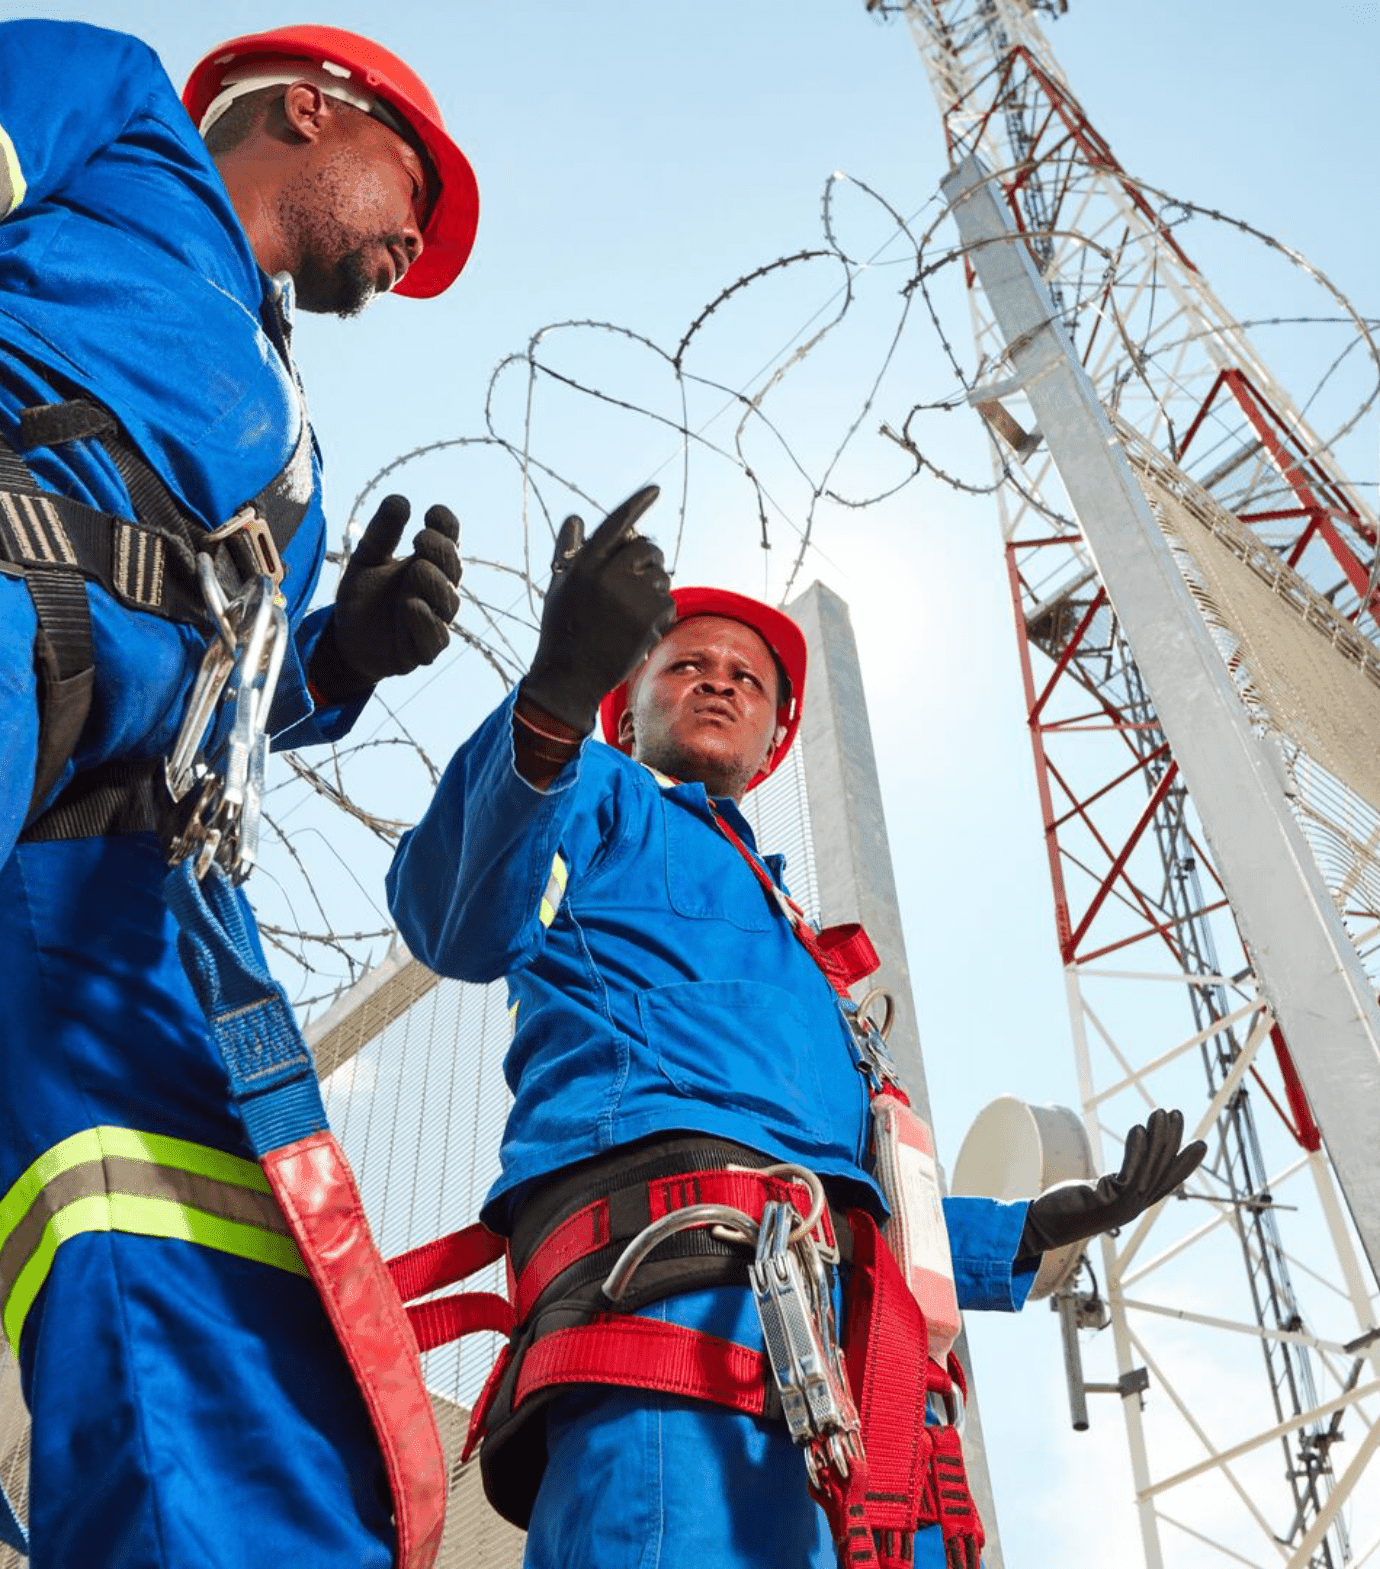 vodafone-two-engineers-in-safety-gear-talking